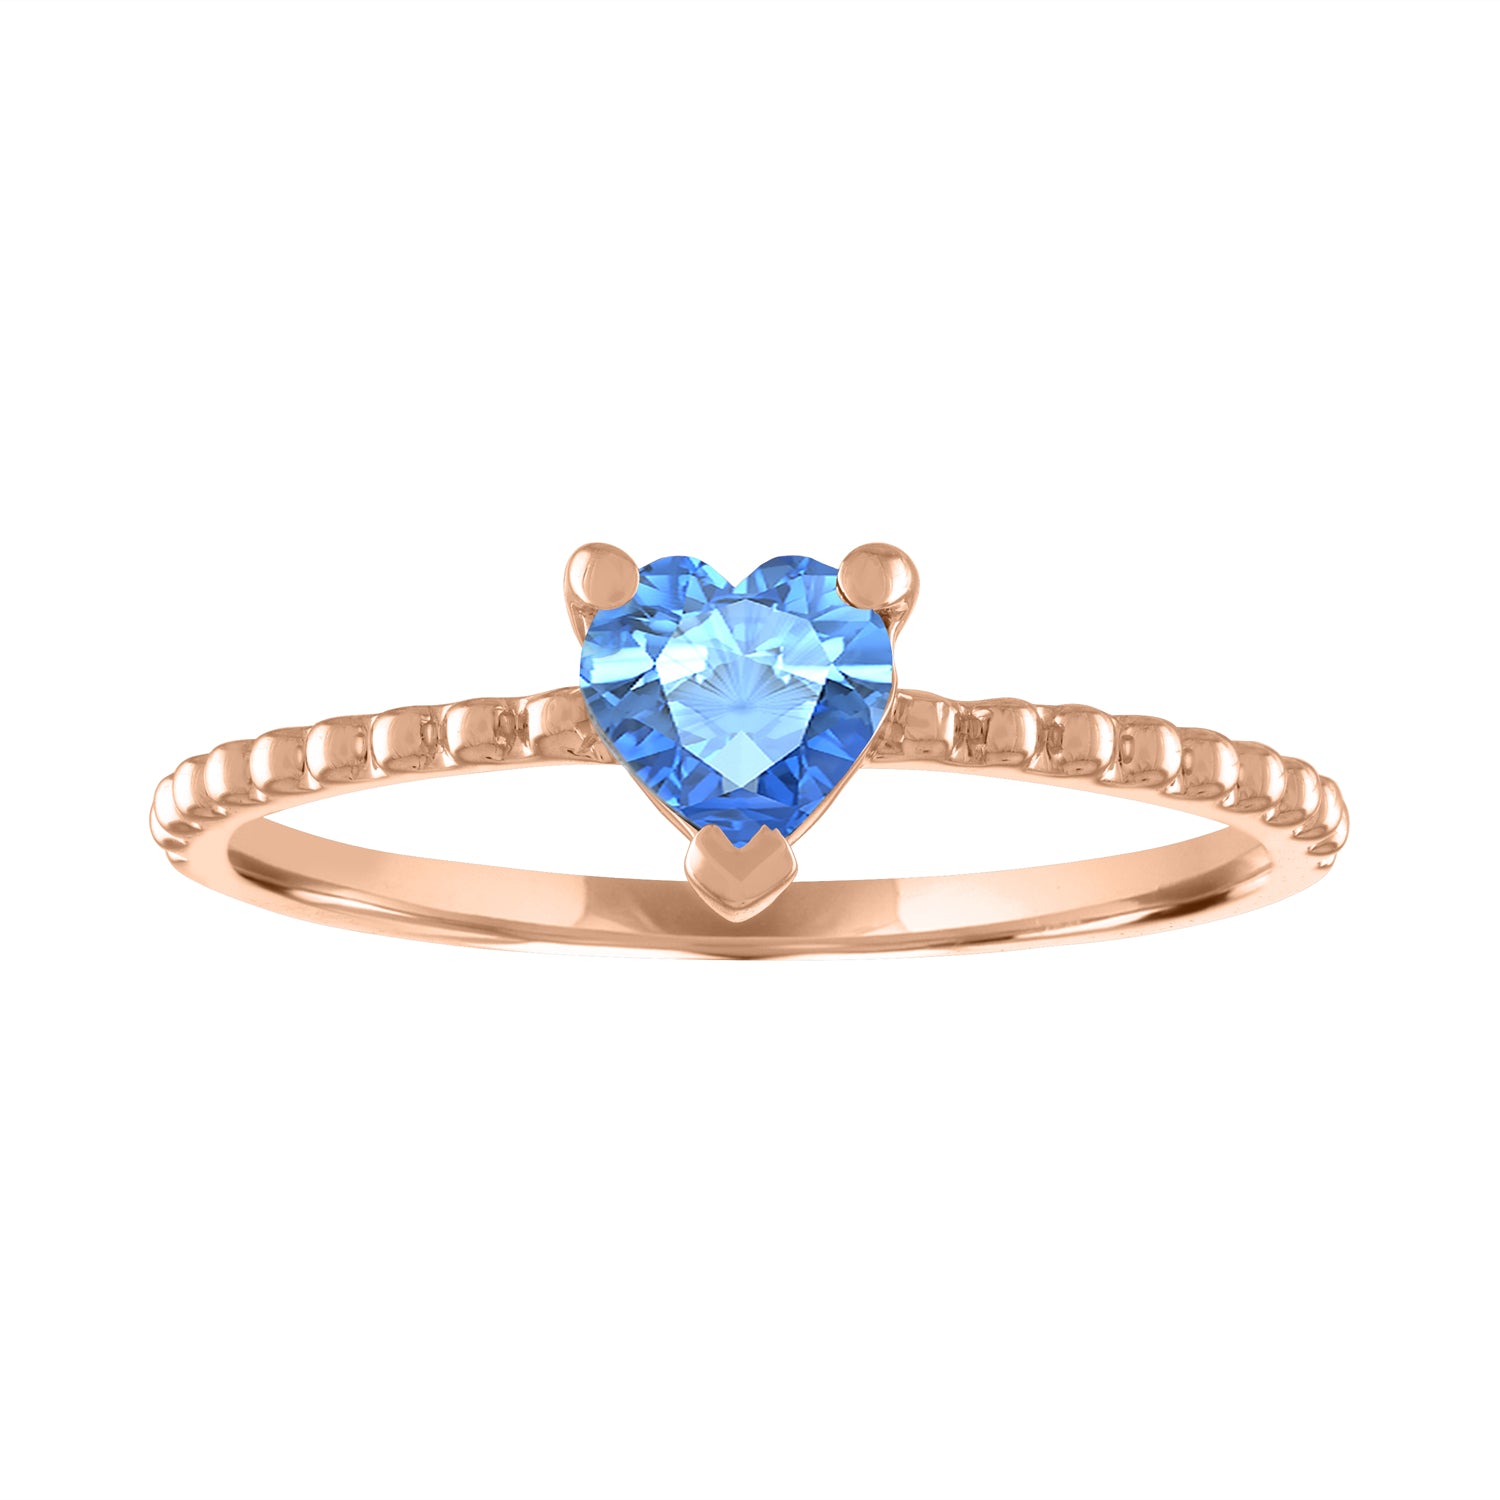 Rose gold beaded skinny band with a heart shaped blue topaz in the center. 